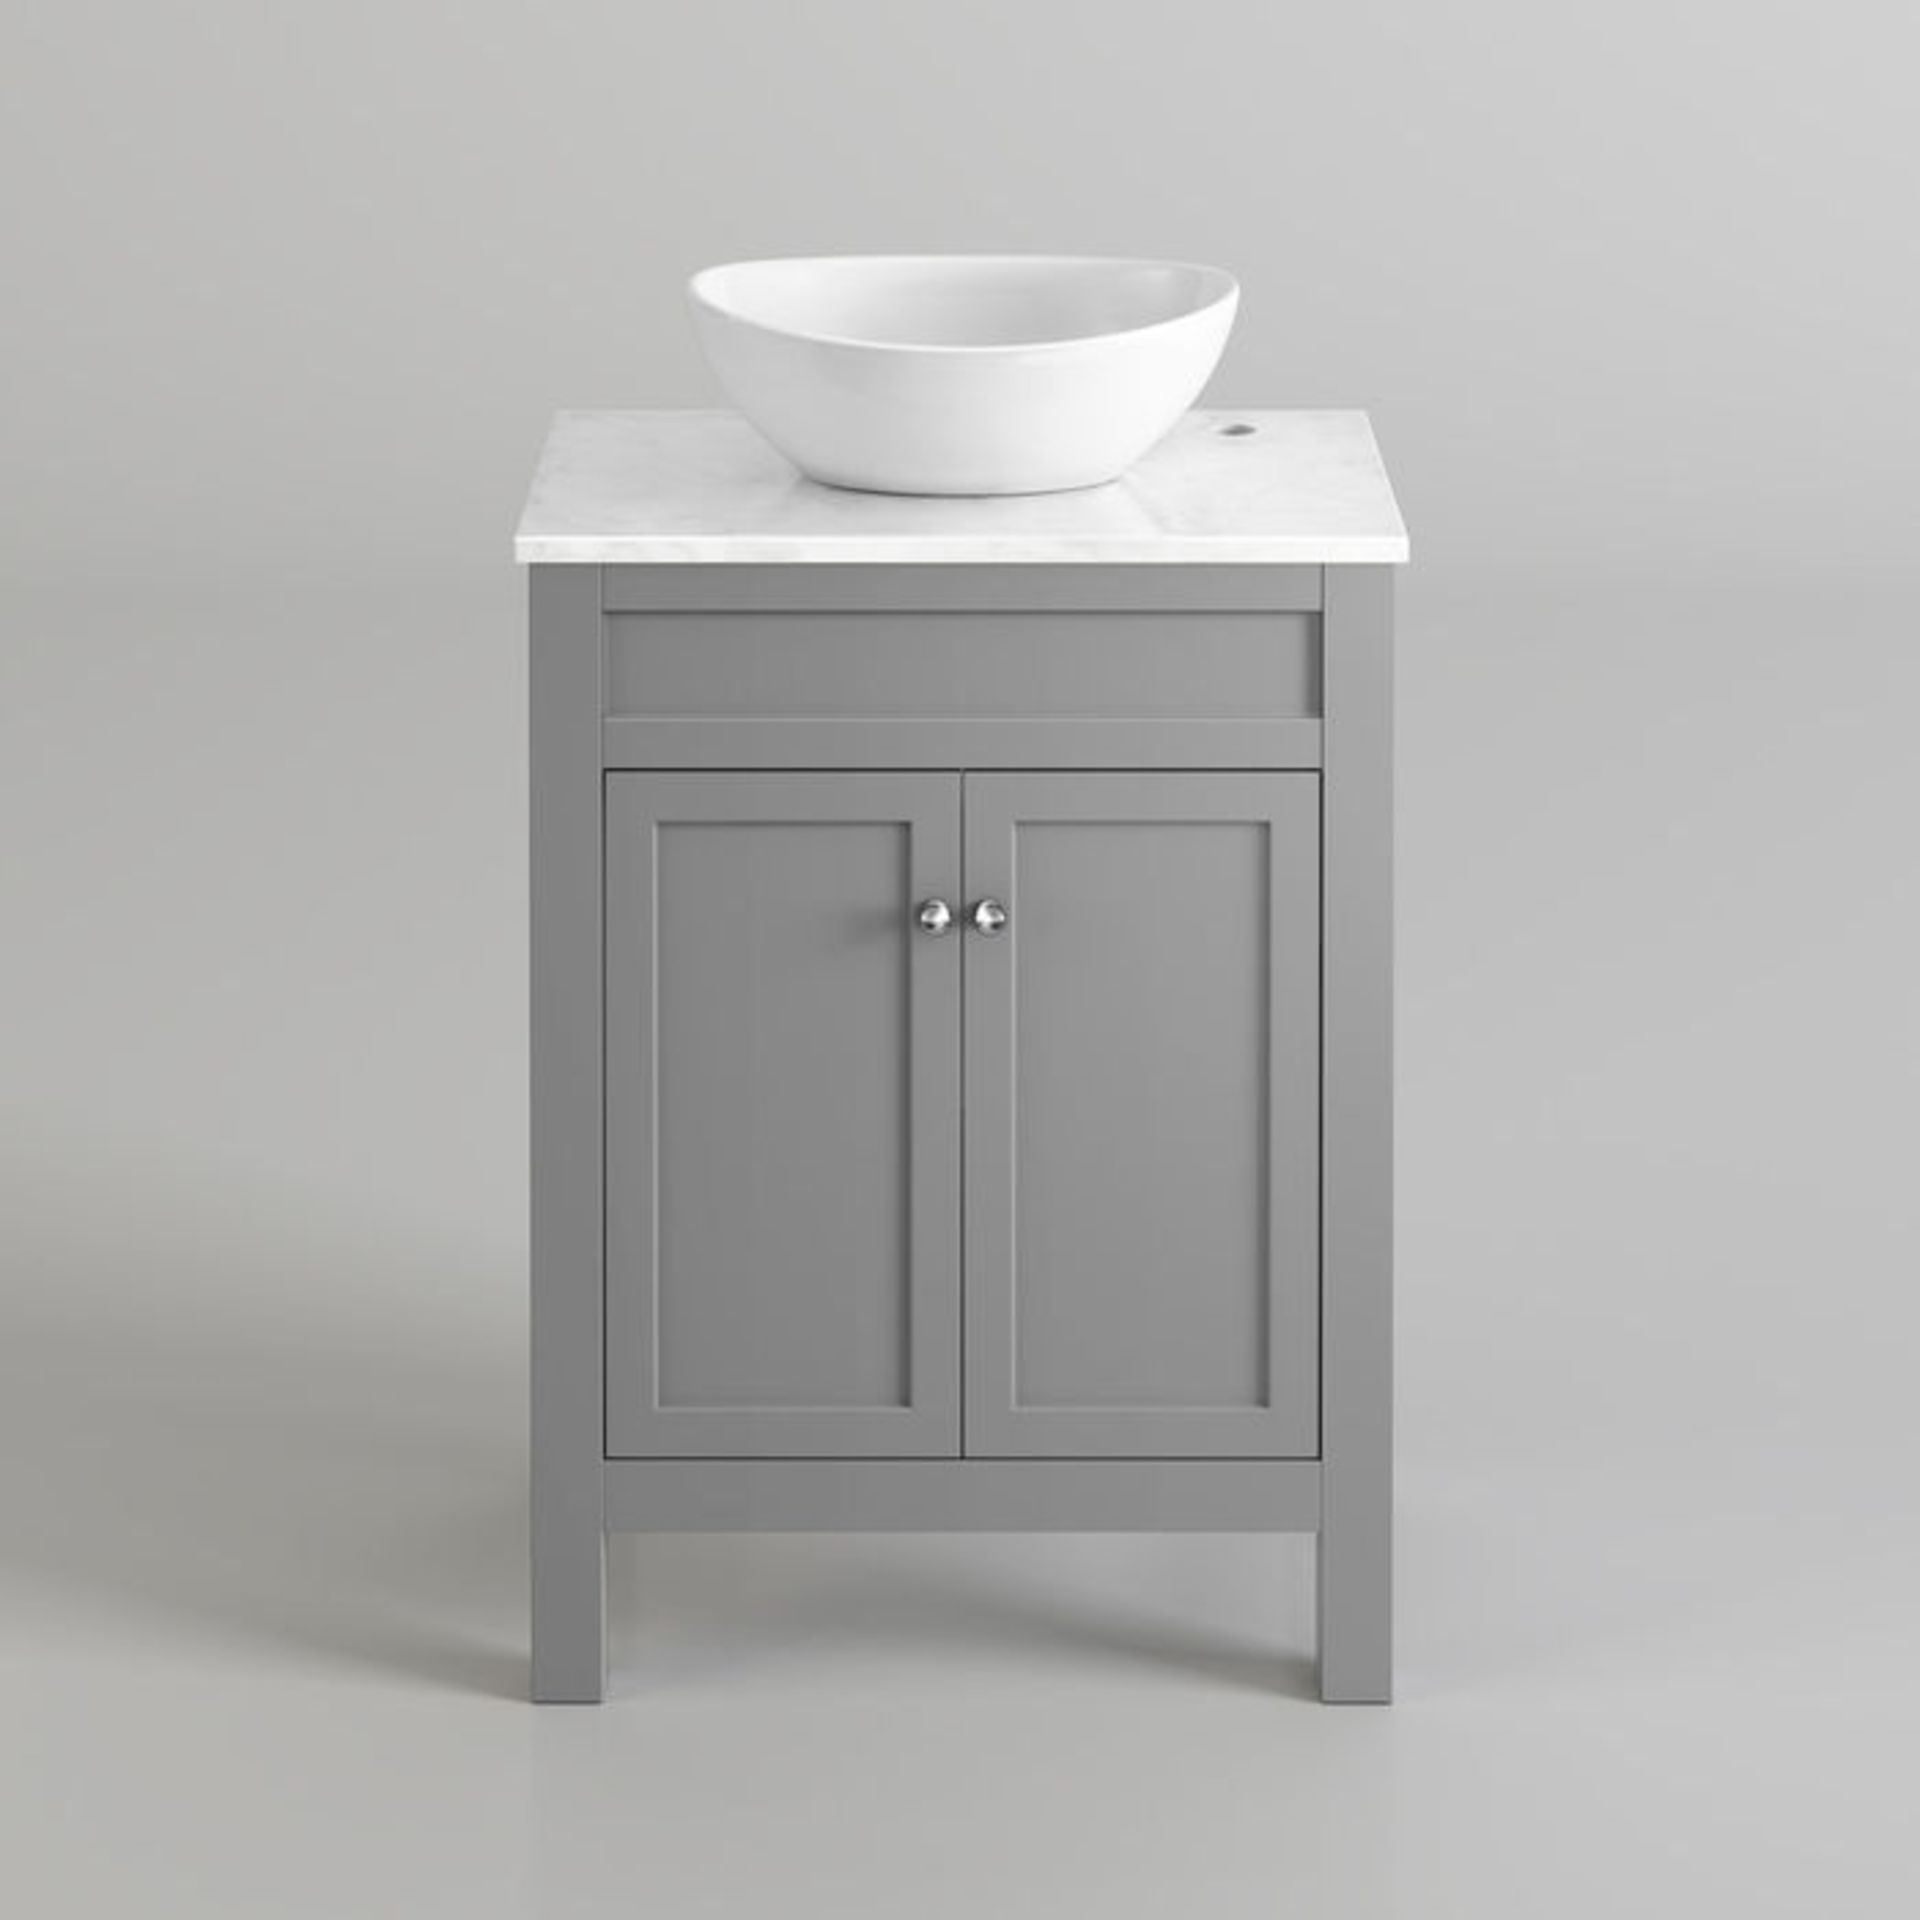 (MQ12) 600mm Melbourne Earl Grey Stone Countertop Unit & Camila Sink - Floor Standing. RRP £54... - Image 2 of 2